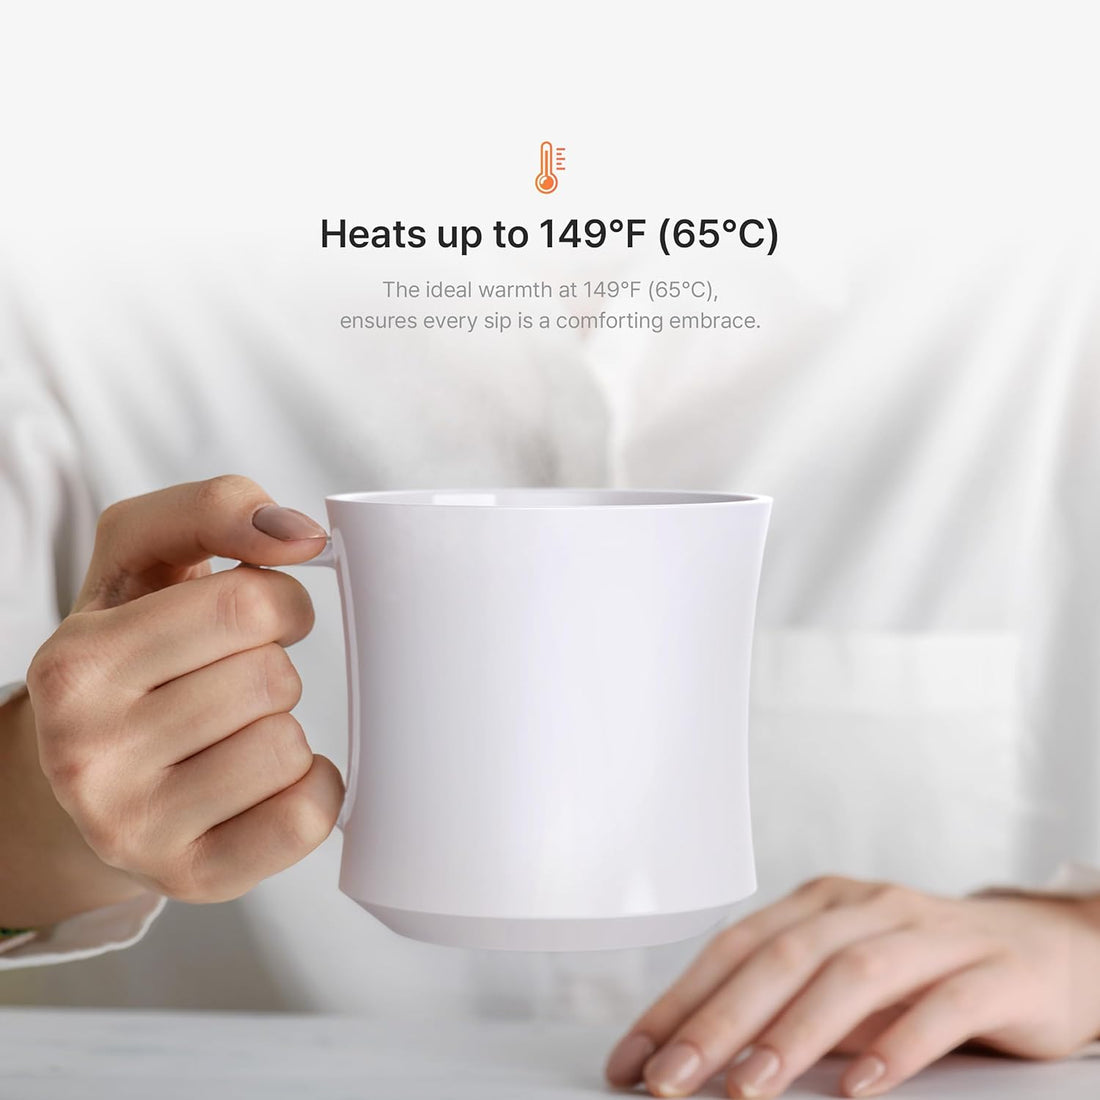 hurkins Smug, up to 149℉ Coffee Mug Warmer & Mug & pctg Lid Set, self Heated Cup with Wireless Charging Function, Office/Home for Desk. (Grande White)